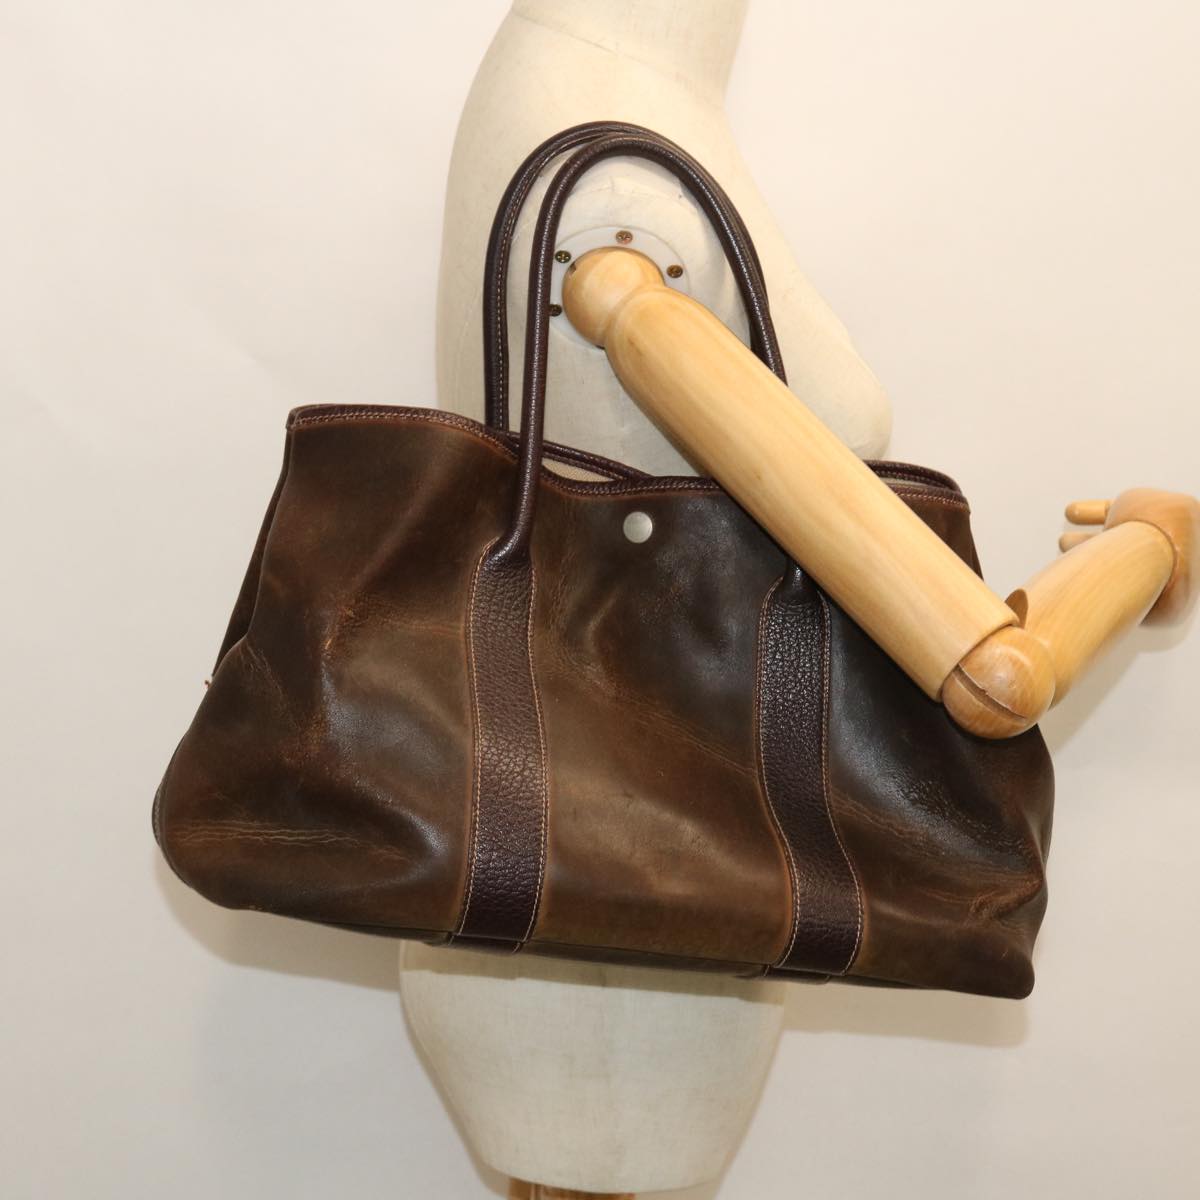 HERMES Garden Party PM Tote Bag Leather Amazonia Brown Auth bs7528